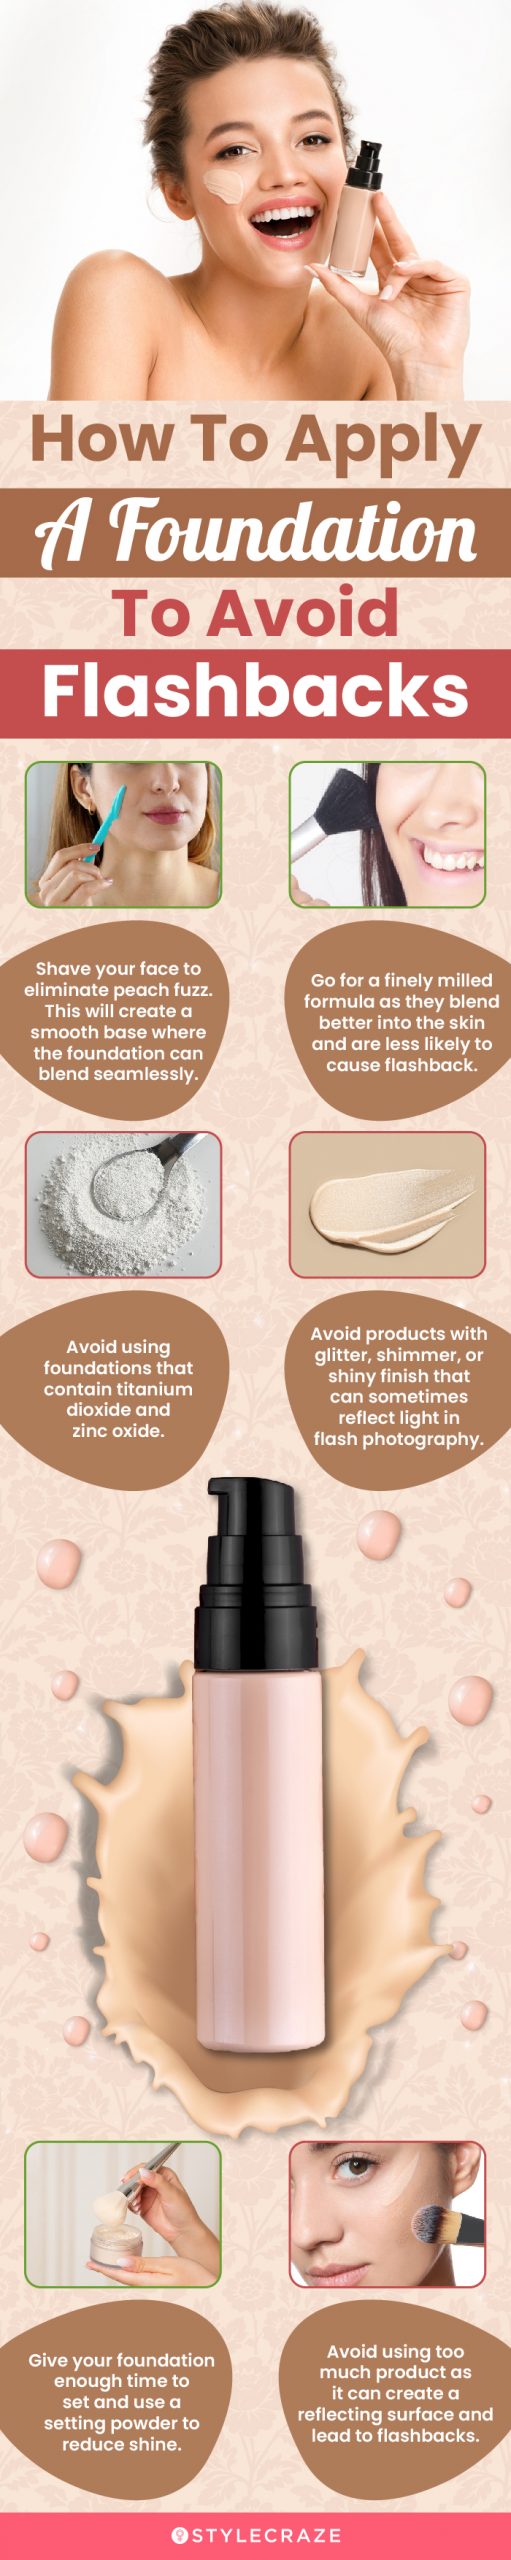 How To Apply A Foundation To Avoid Flashbacks (infographic)